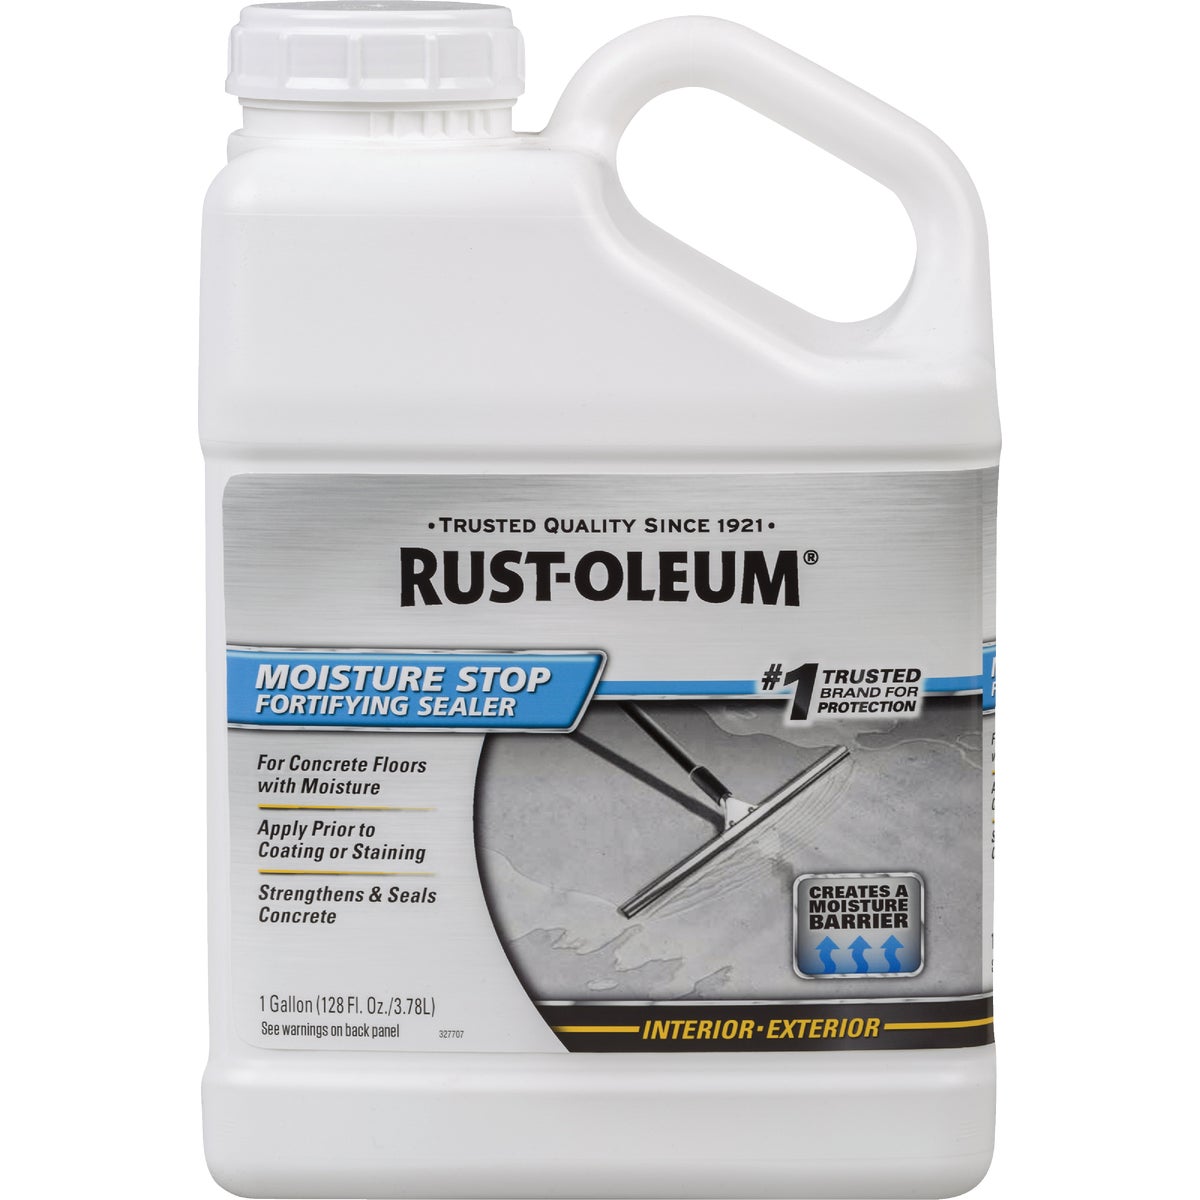 Item 771997, Rust-Oleum Moisture Stop penetrates into concrete and reacts with the free 